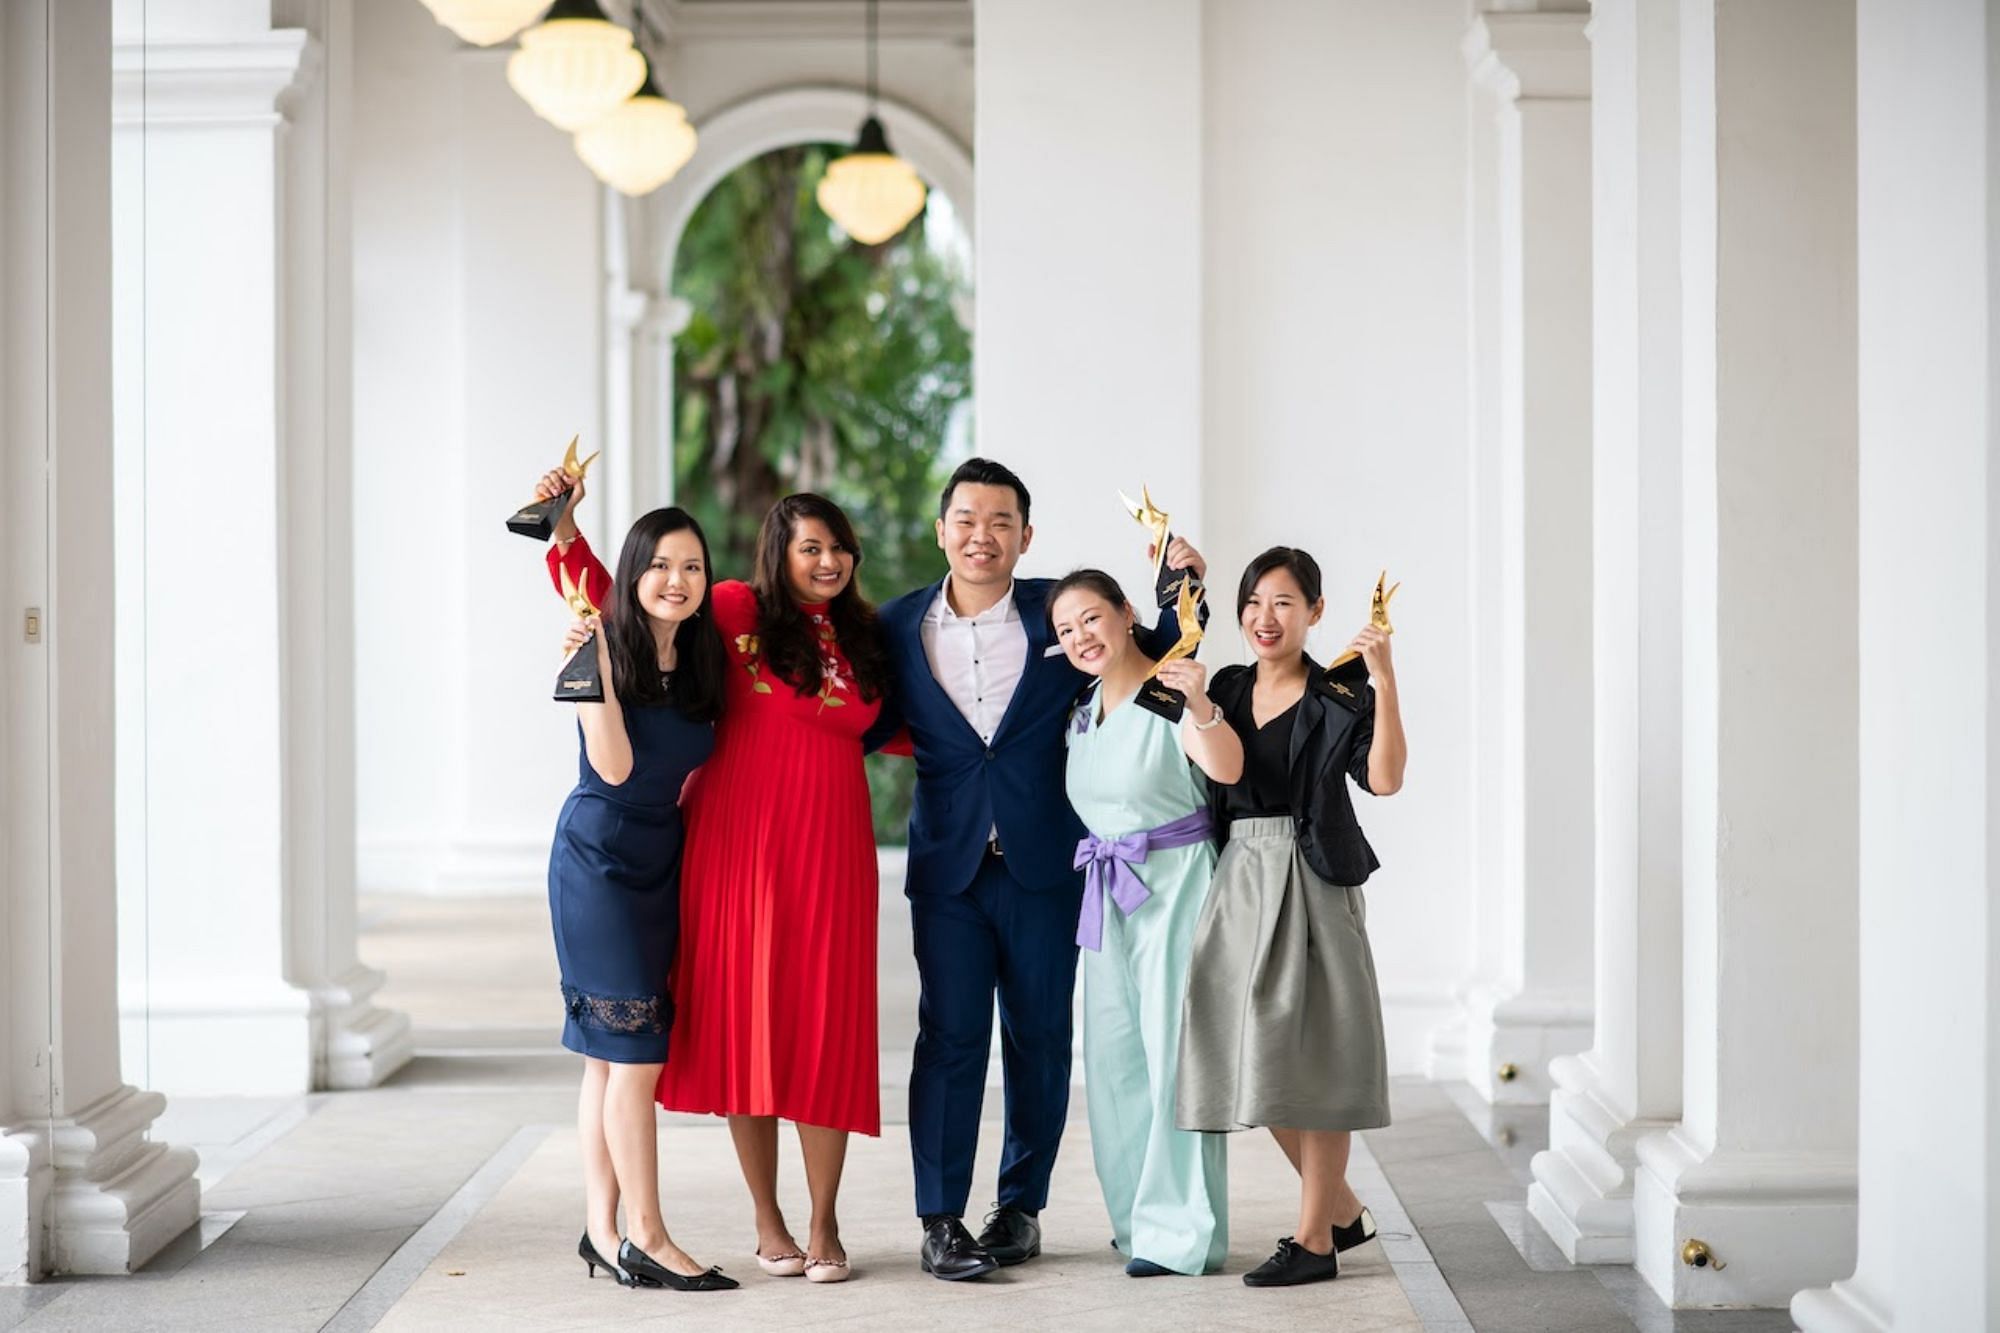 National Youth Council Singapore Youth Award 2019